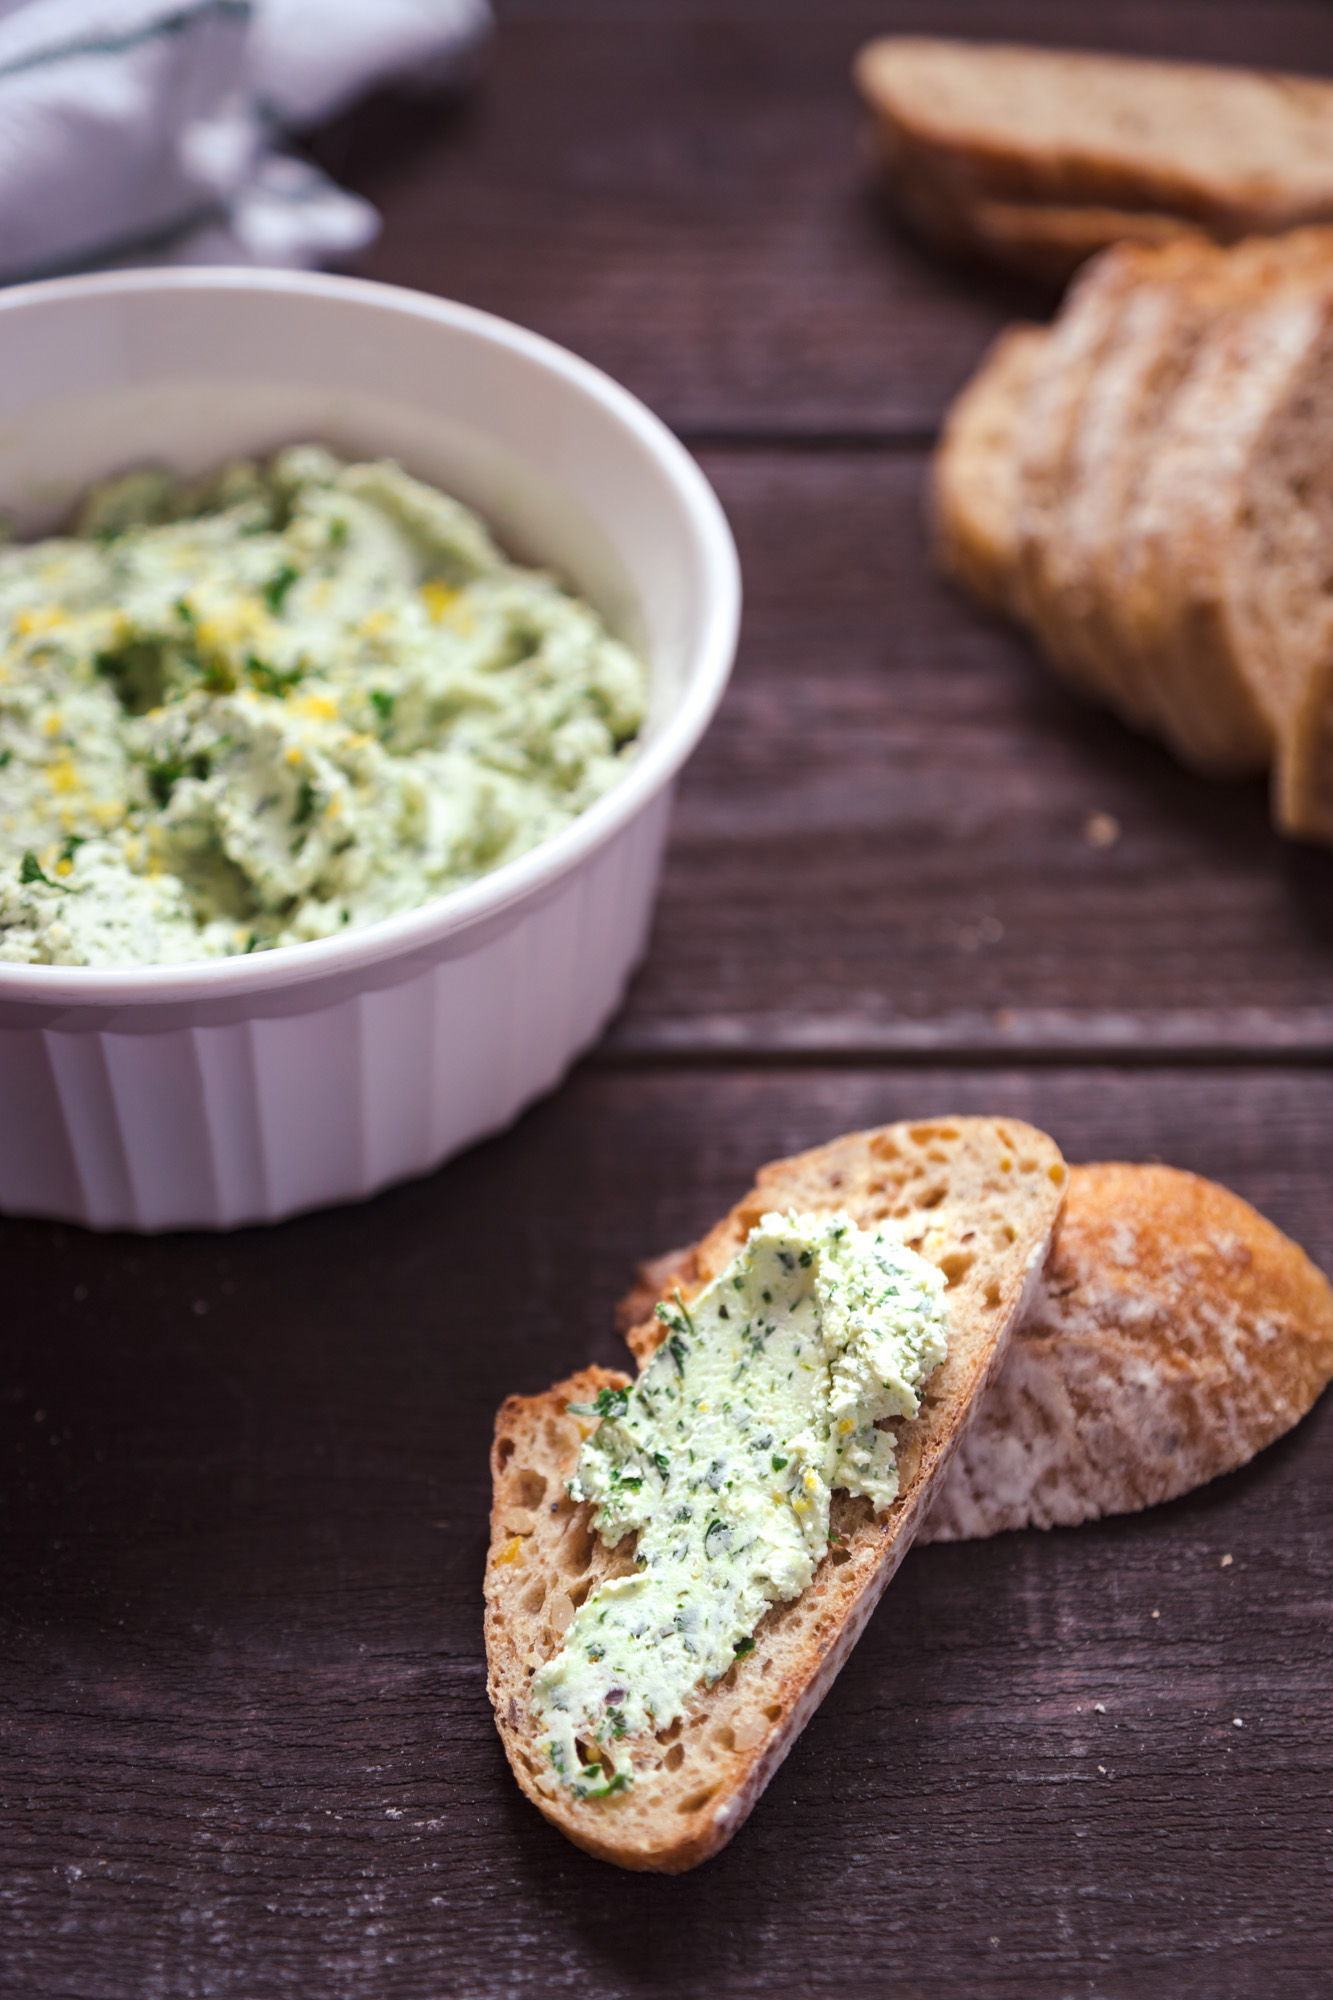 Lemon-herb goat cheese spread is excellent on bread as a light appetizer.